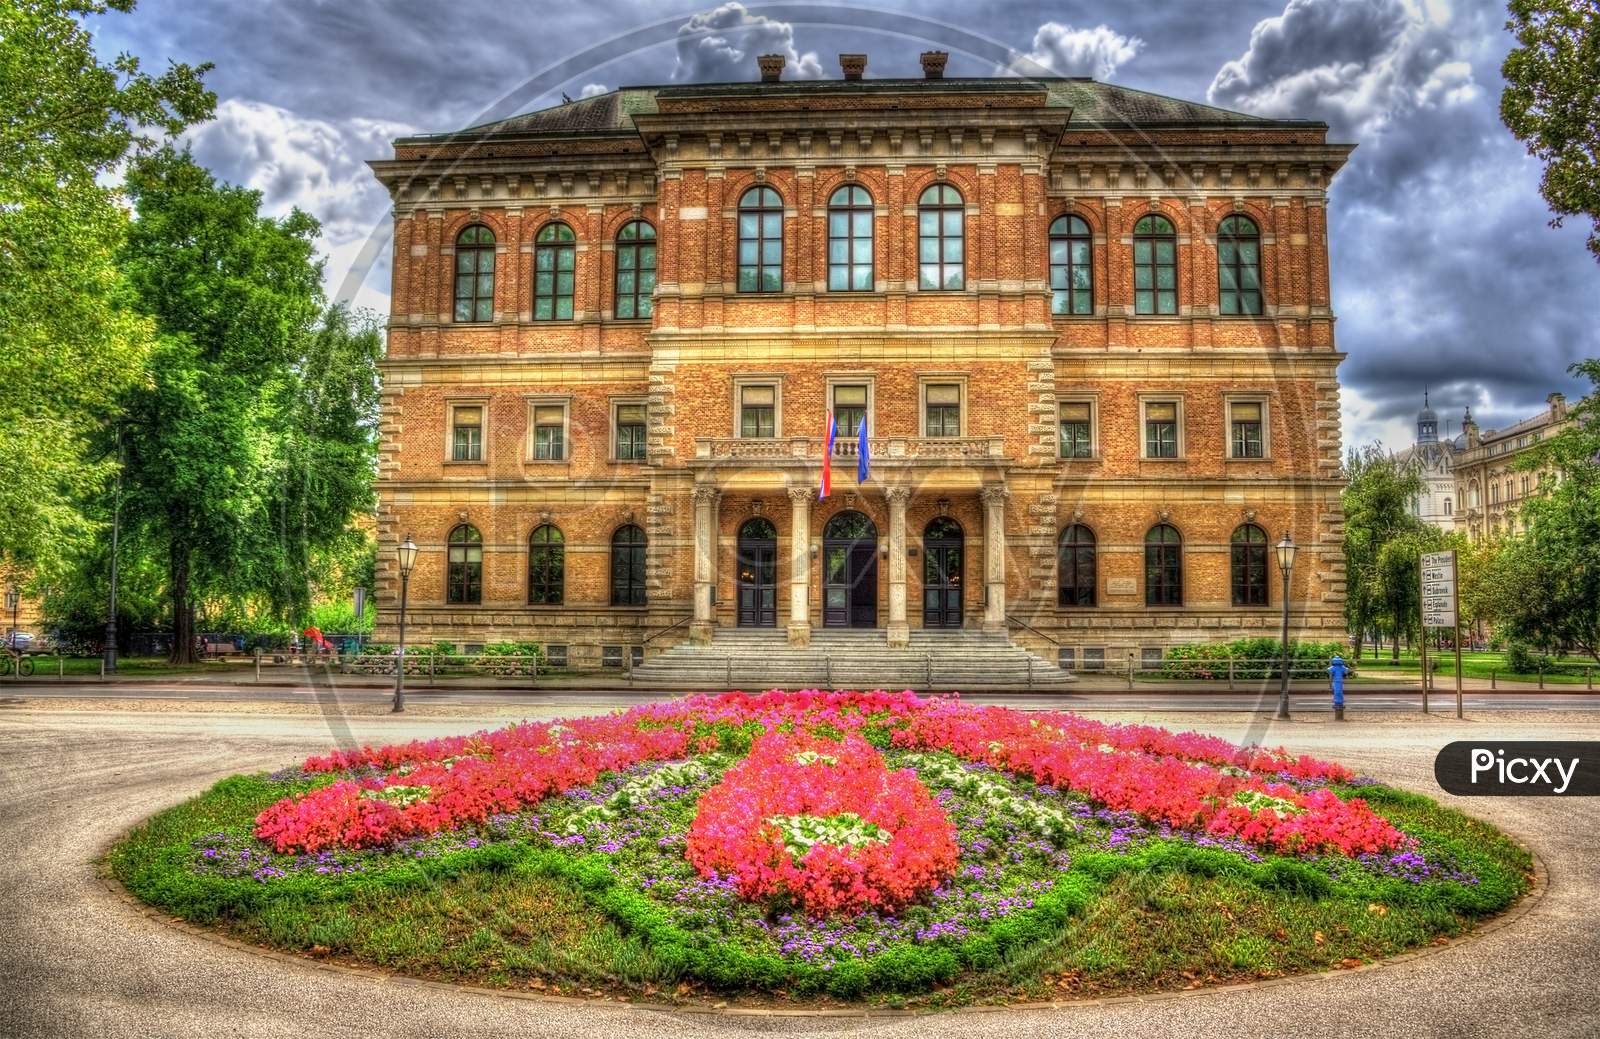 Croatian Academy Of Sciences And Arts In Zagreb